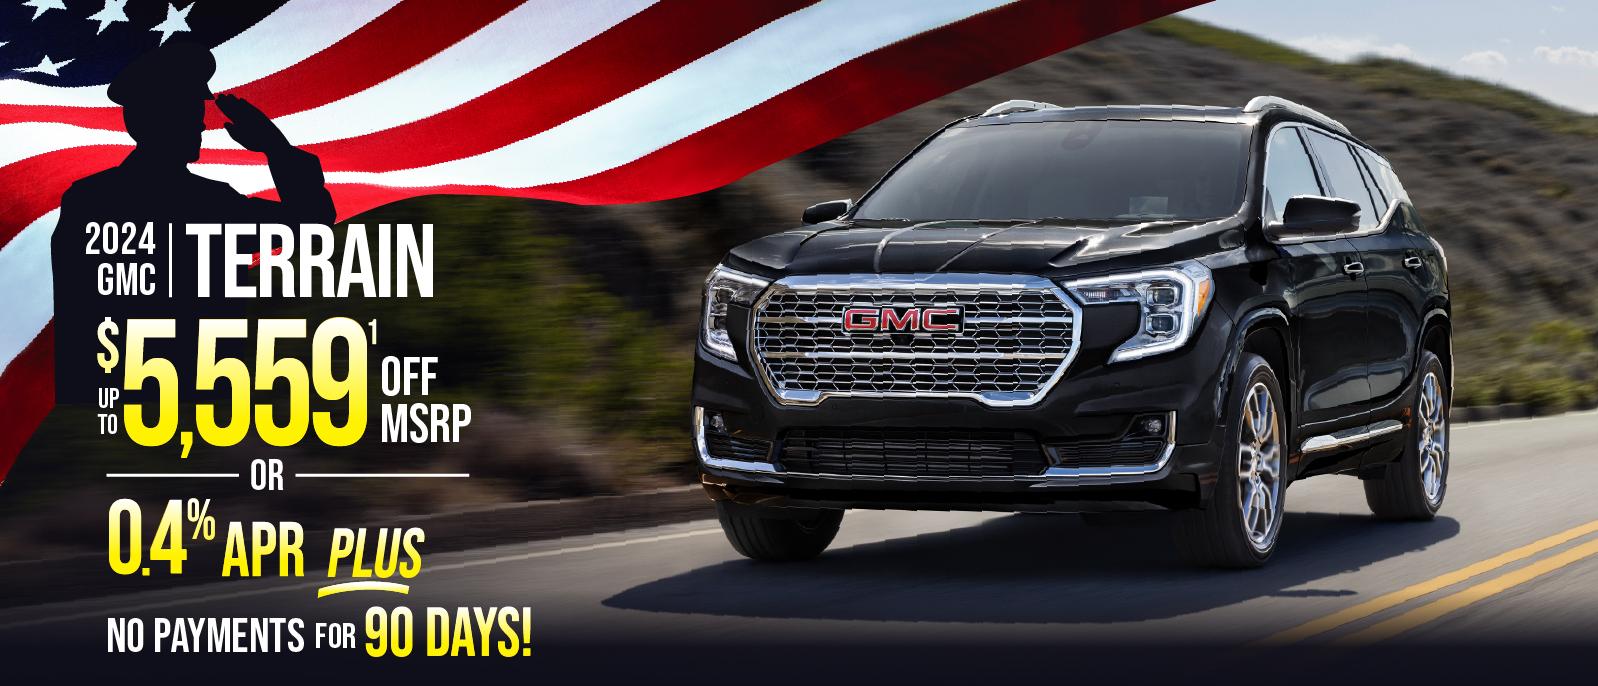 2024 GMC Terrain - up to $5559 OFF MSRP or 0.4% APR plus no payments for 90 days